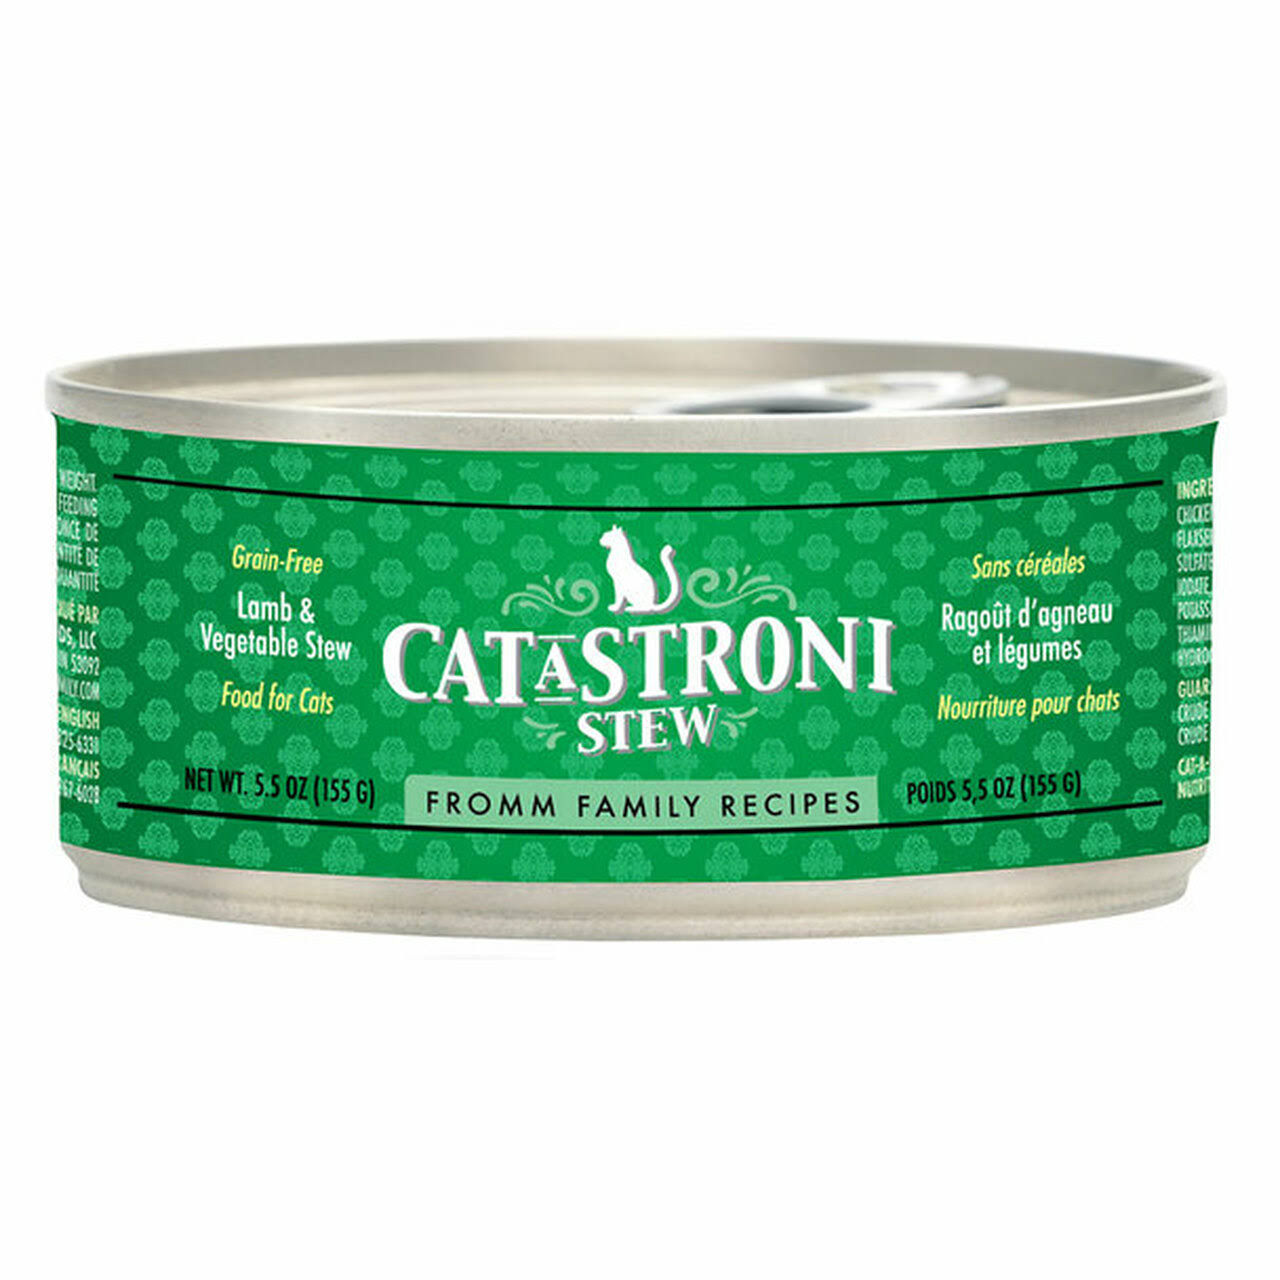 Fromm Cat-A-Stroni Stew 5.5oz Canned Cat Food - Lamb